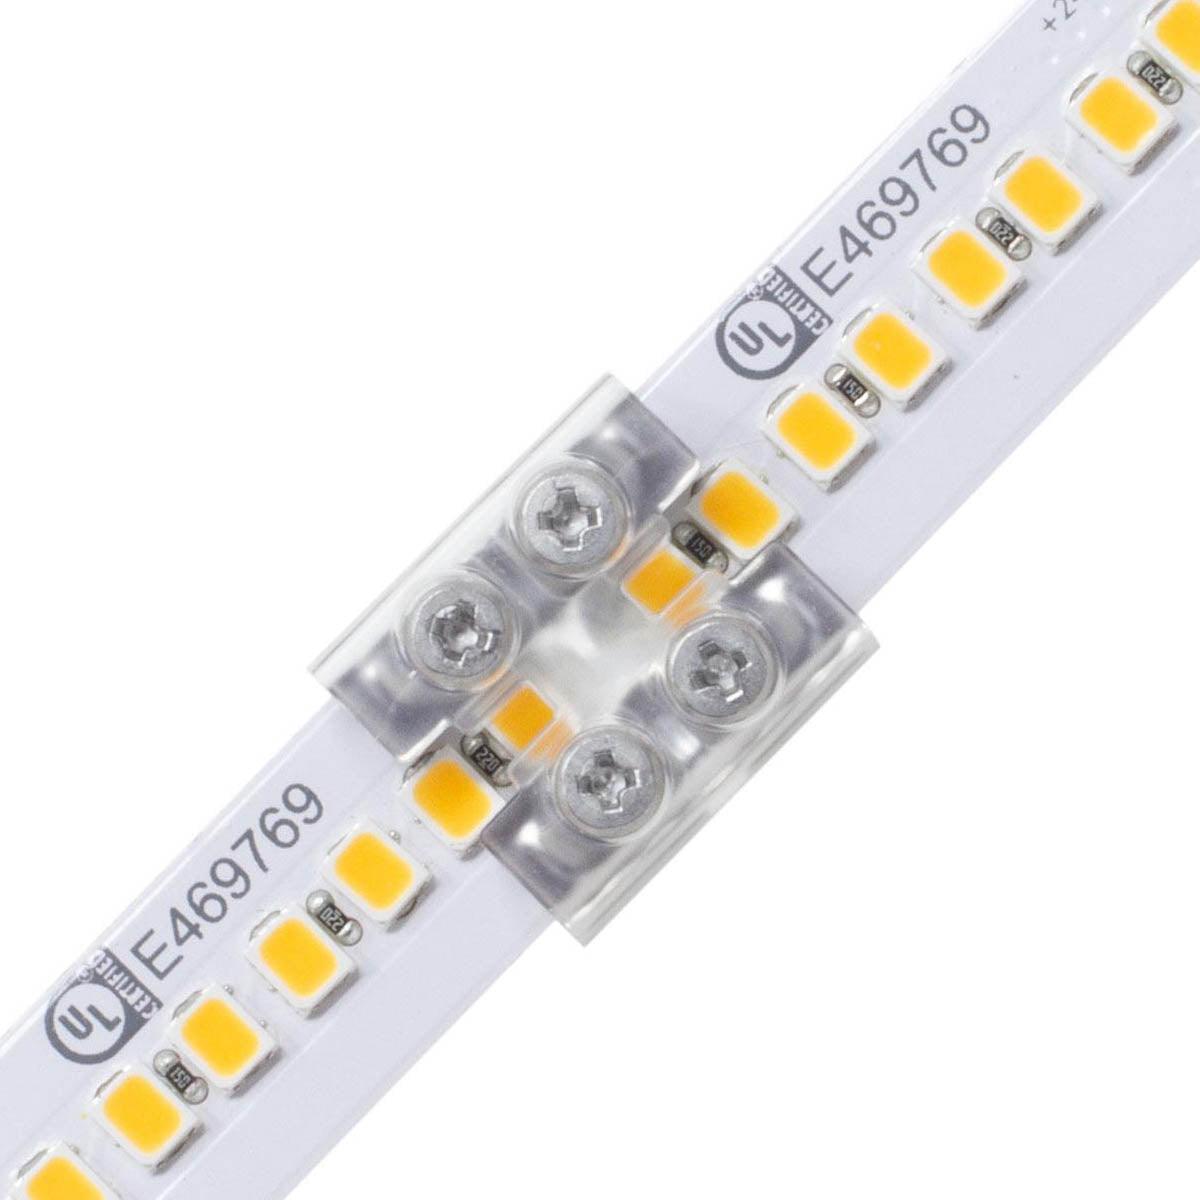 12mm Tape to Tape Terminal Block Connector for Valent X Strip Lights - Bees Lighting